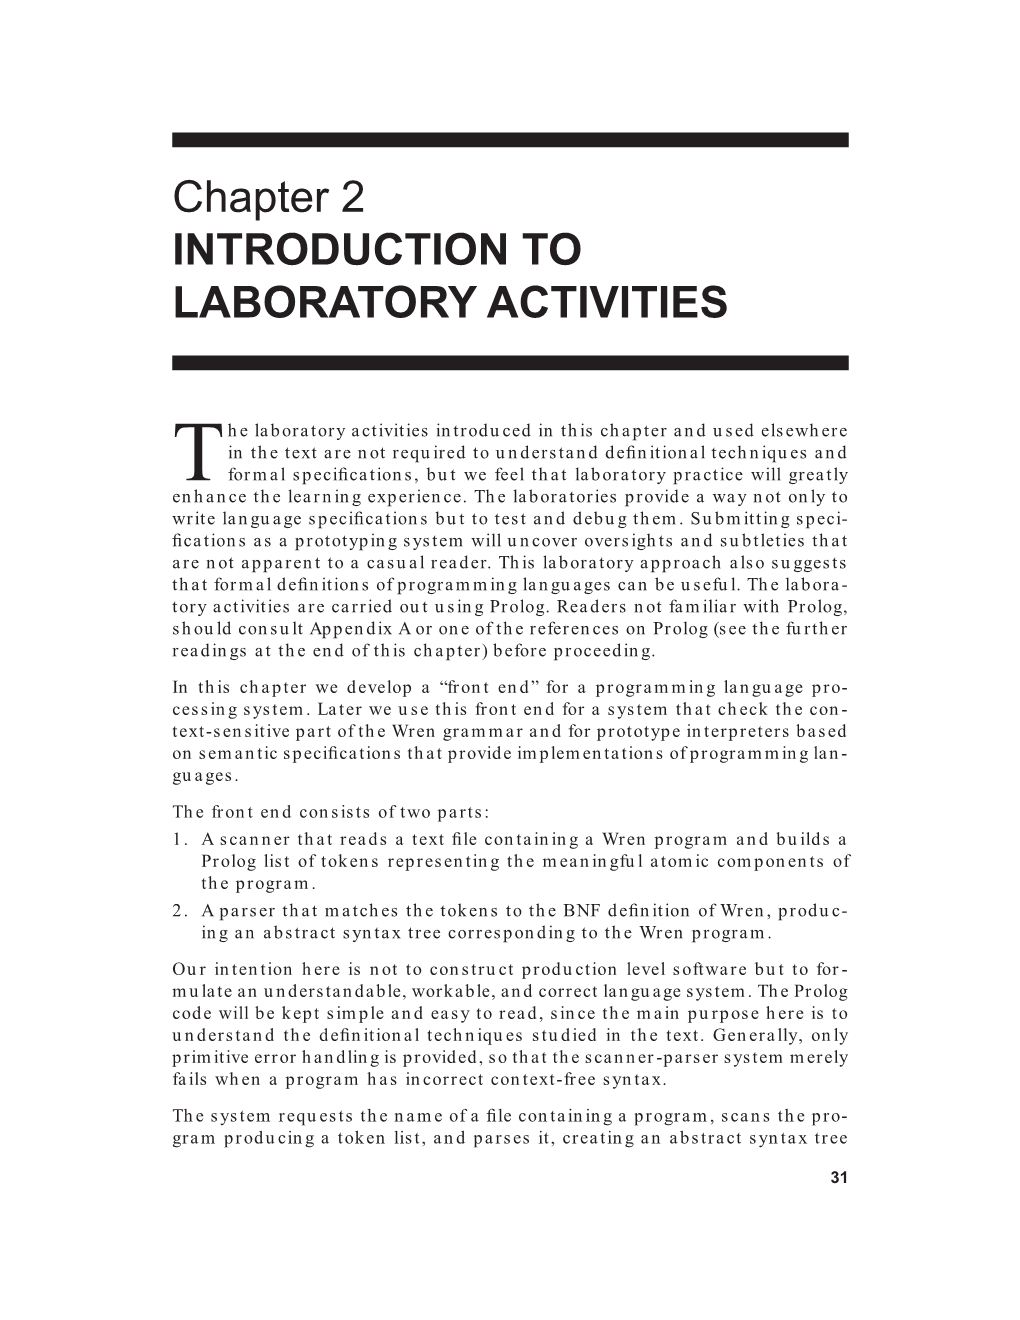 Chapter 2 INTRODUCTION to LABORATORY ACTIVITIES